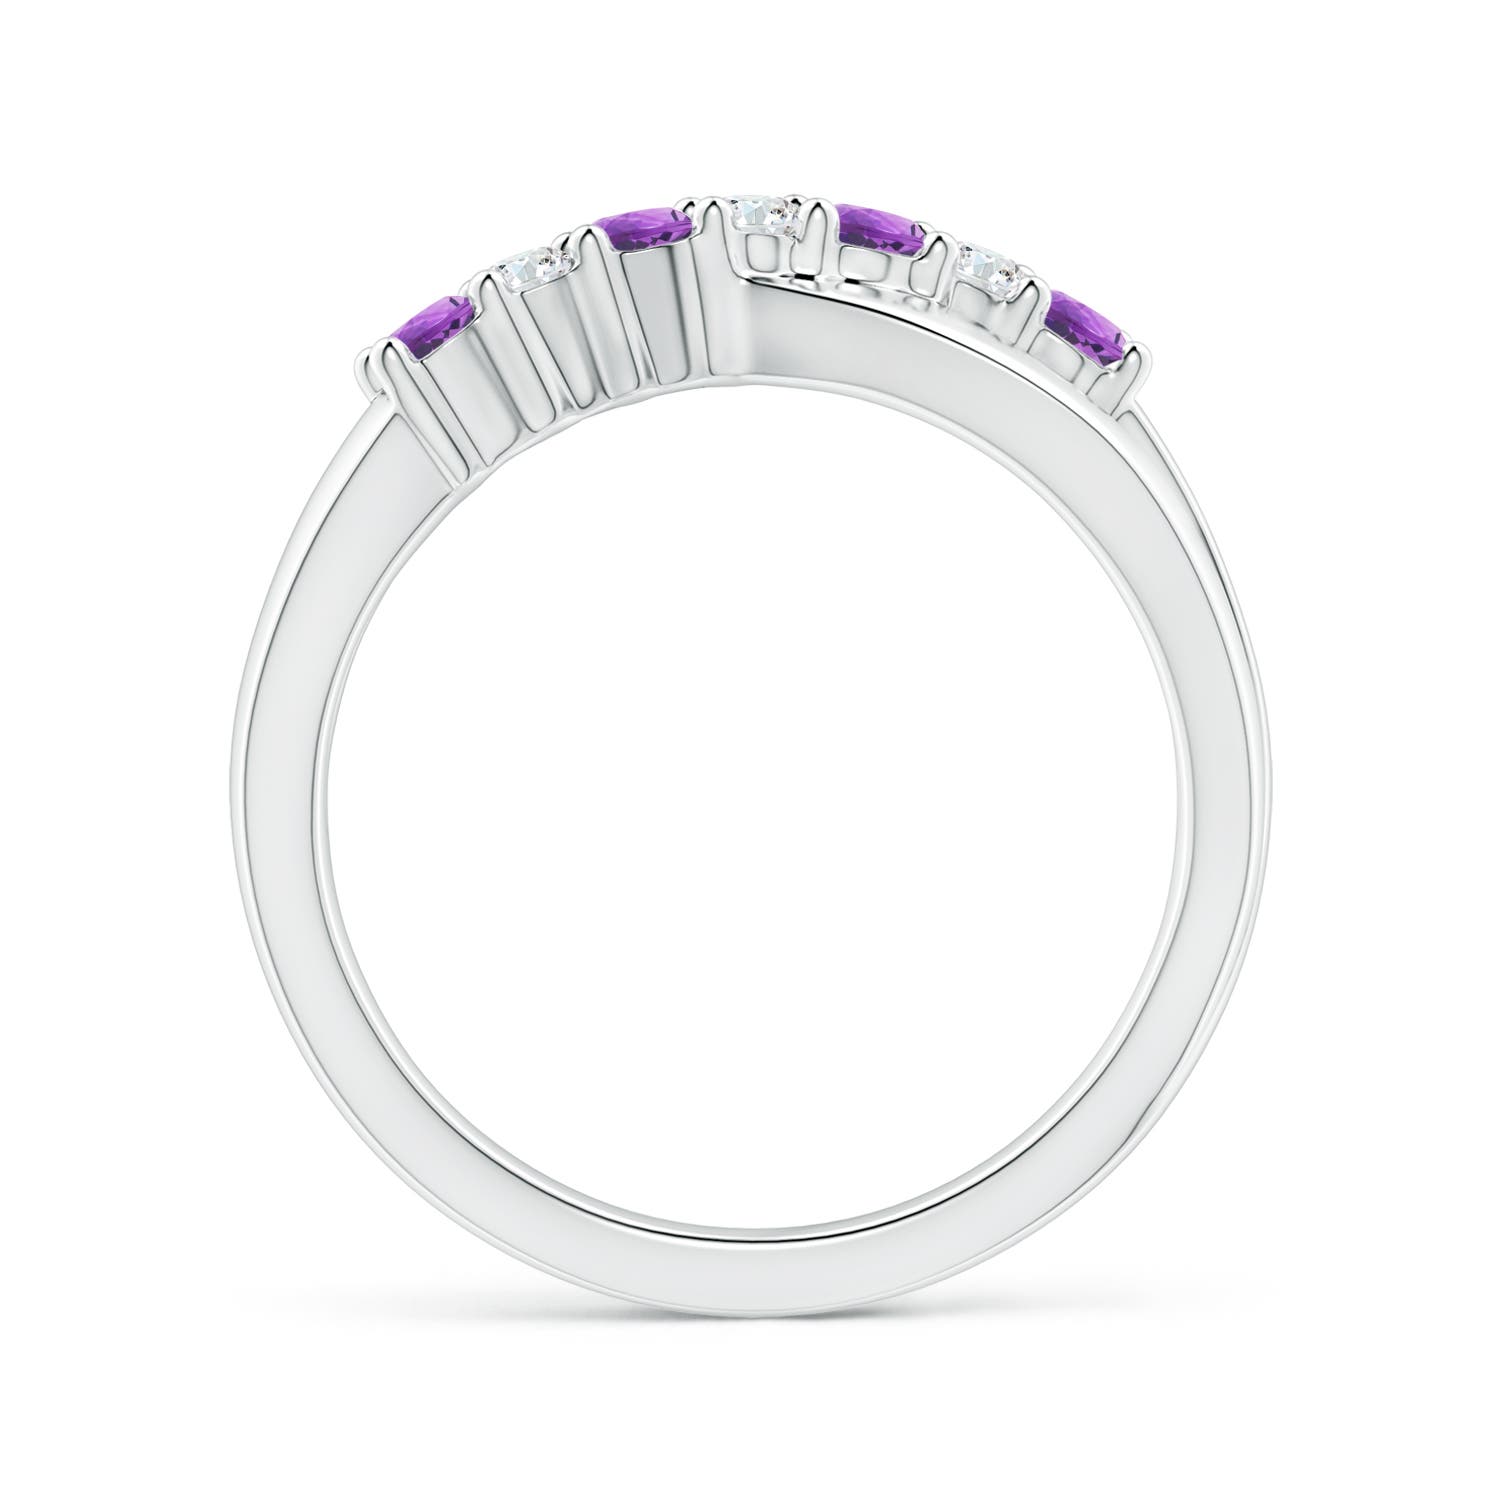 AA - Amethyst / 0.36 CT / 14 KT White Gold